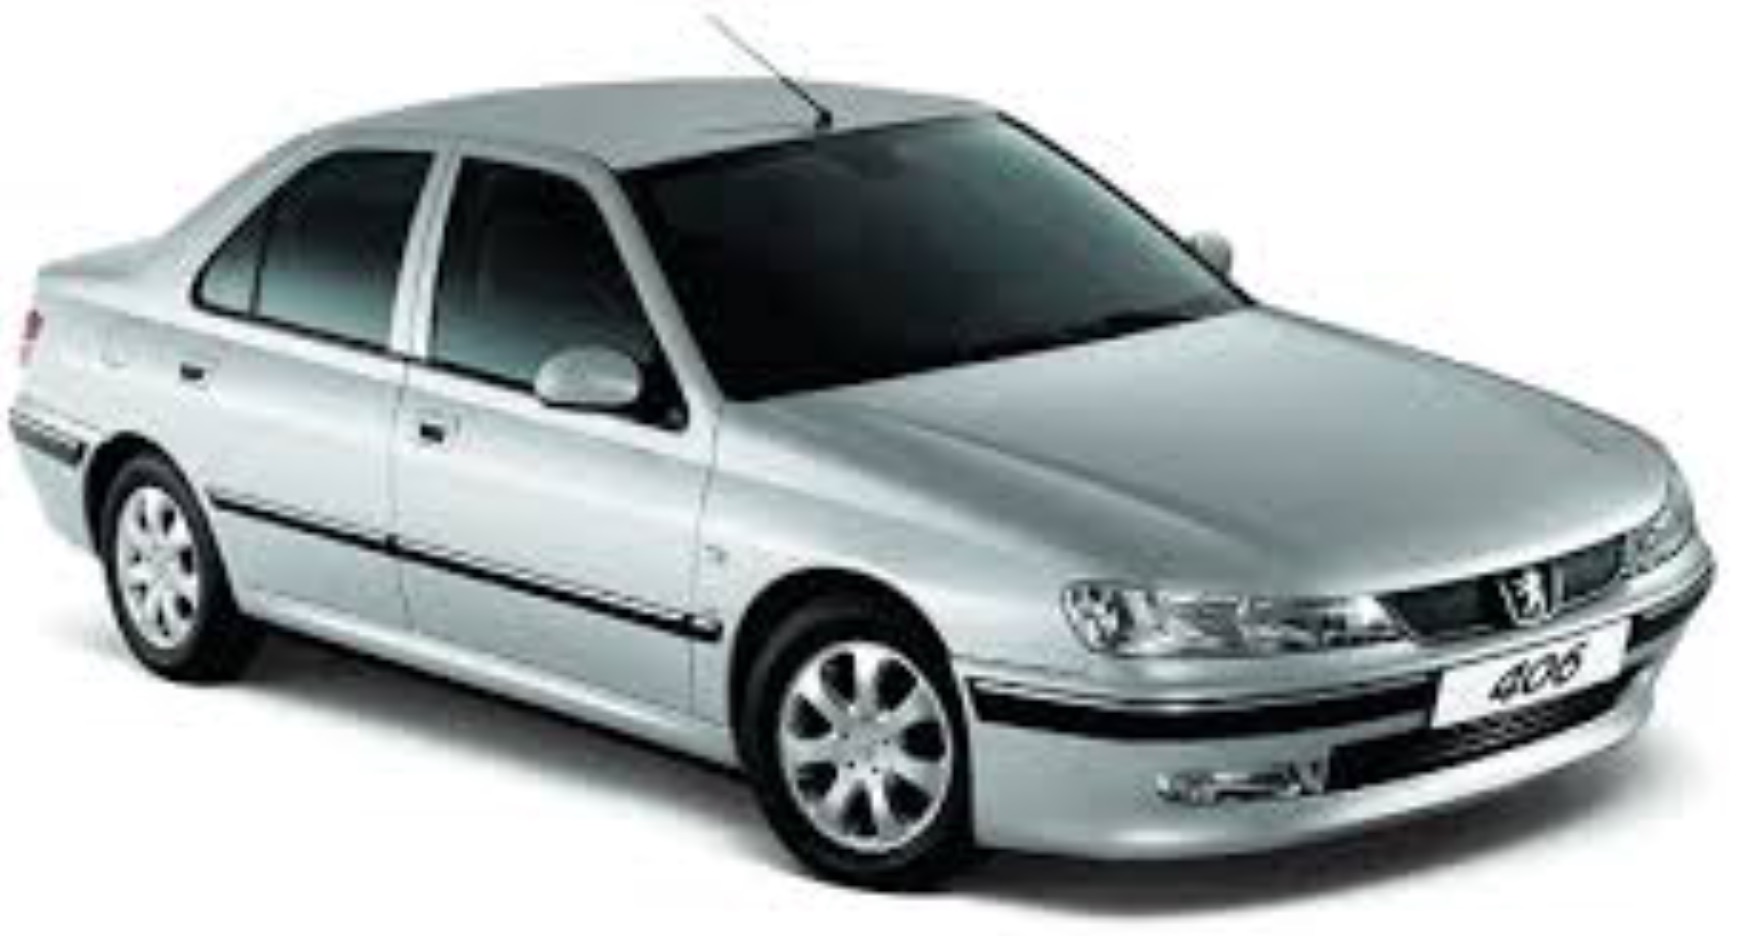 Fichiers Tuning Haute Qualité Peugeot 406 2.0 HDi 90hp